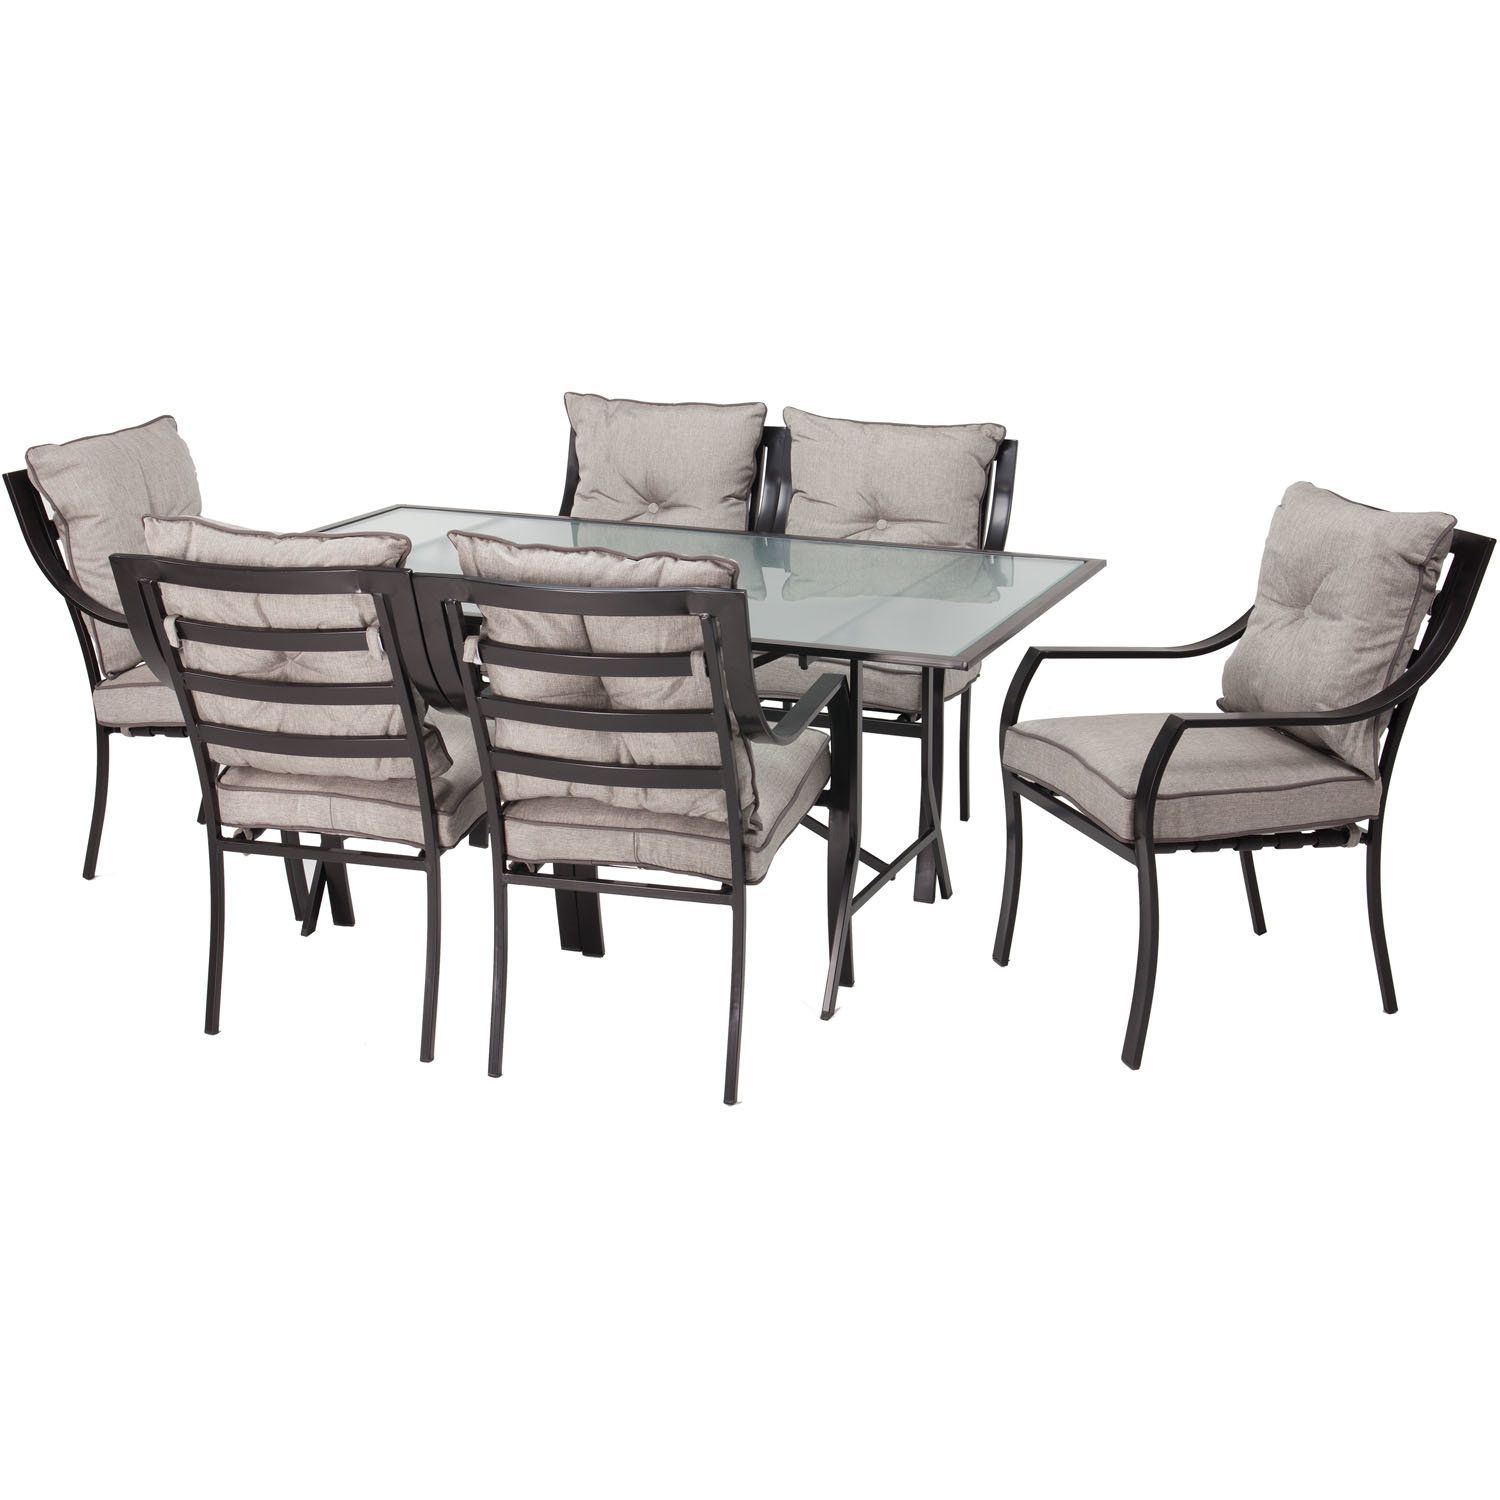 Darby Home Co Bozarth 7 Piece Dining Set With Cushion In Most Current Miskell 3 Piece Dining Sets (Photo 35406 of 35622)